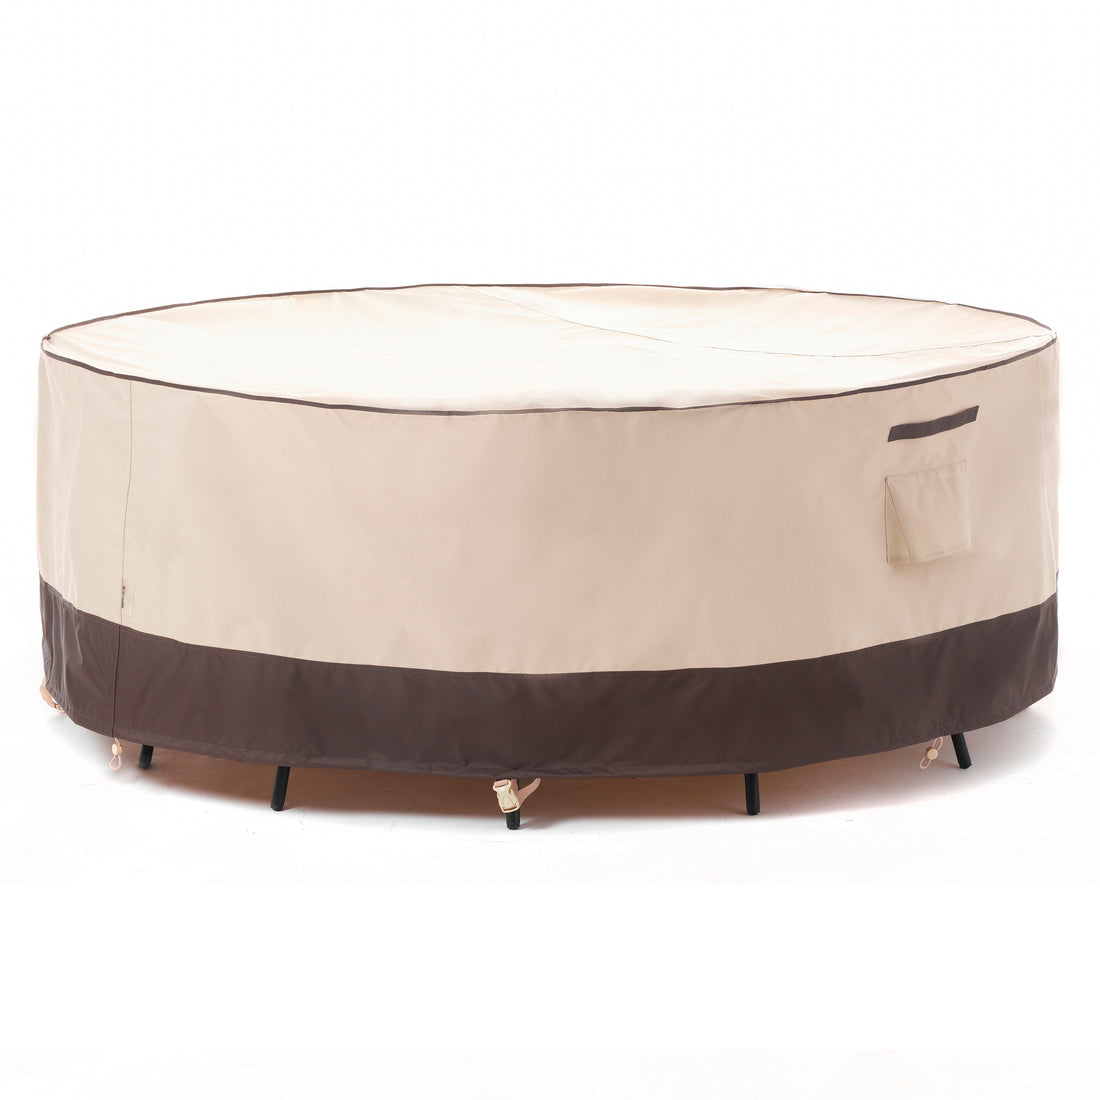 2024 Edition Patio Round Cover - Beige+Coffee